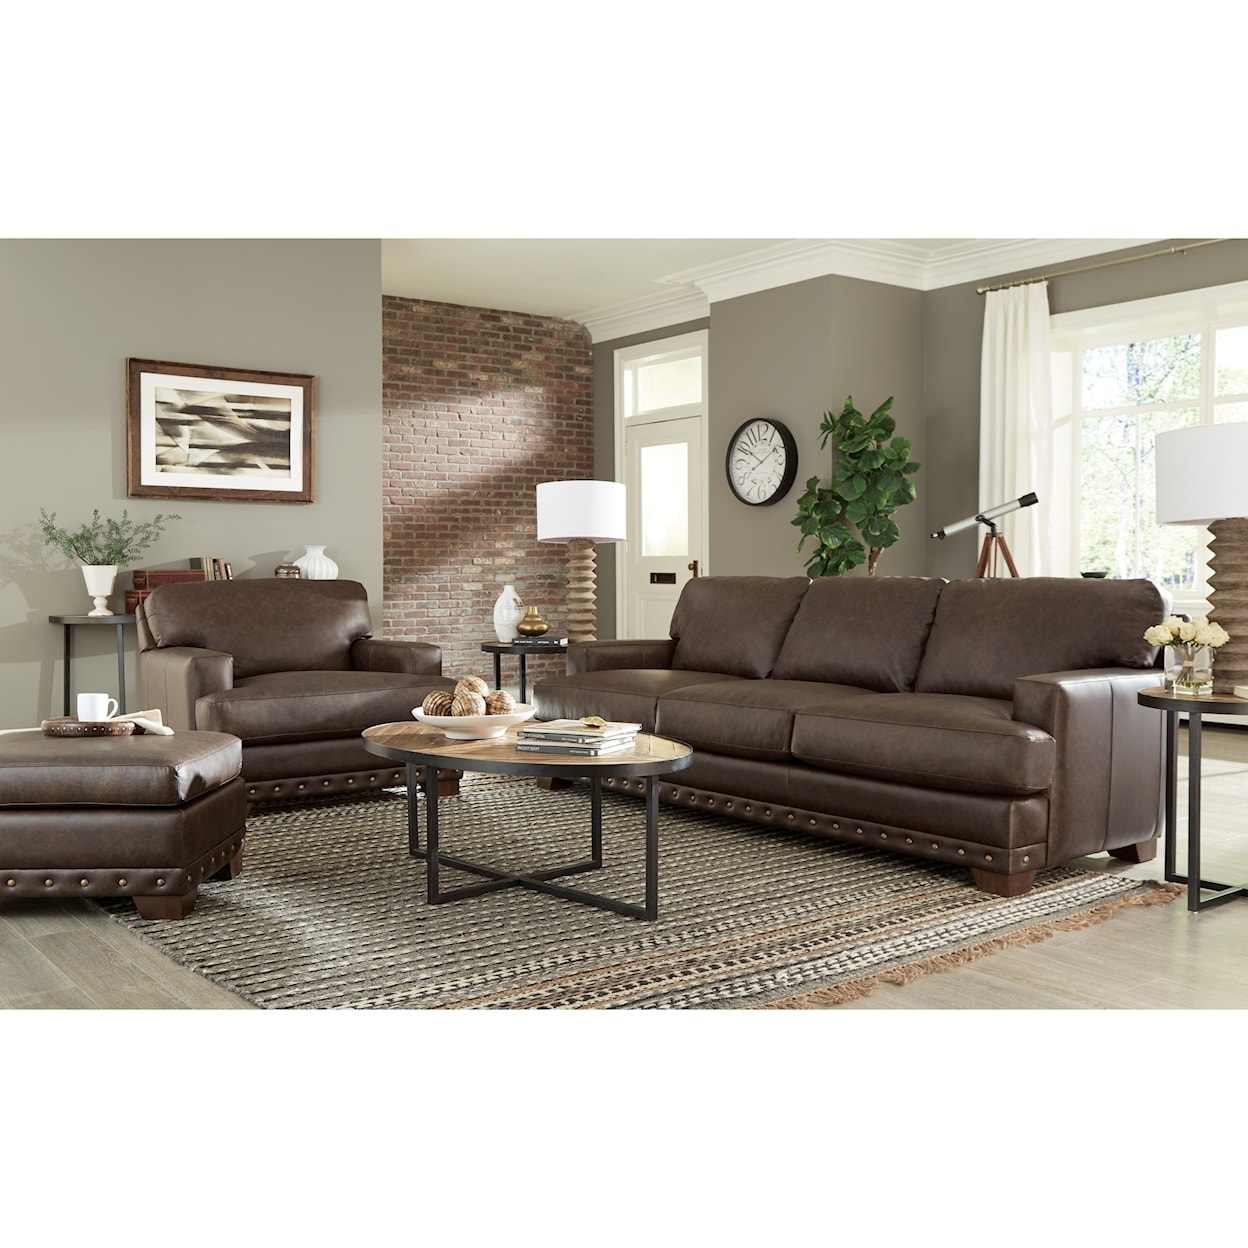 Craftmaster L782750 Living Room Group